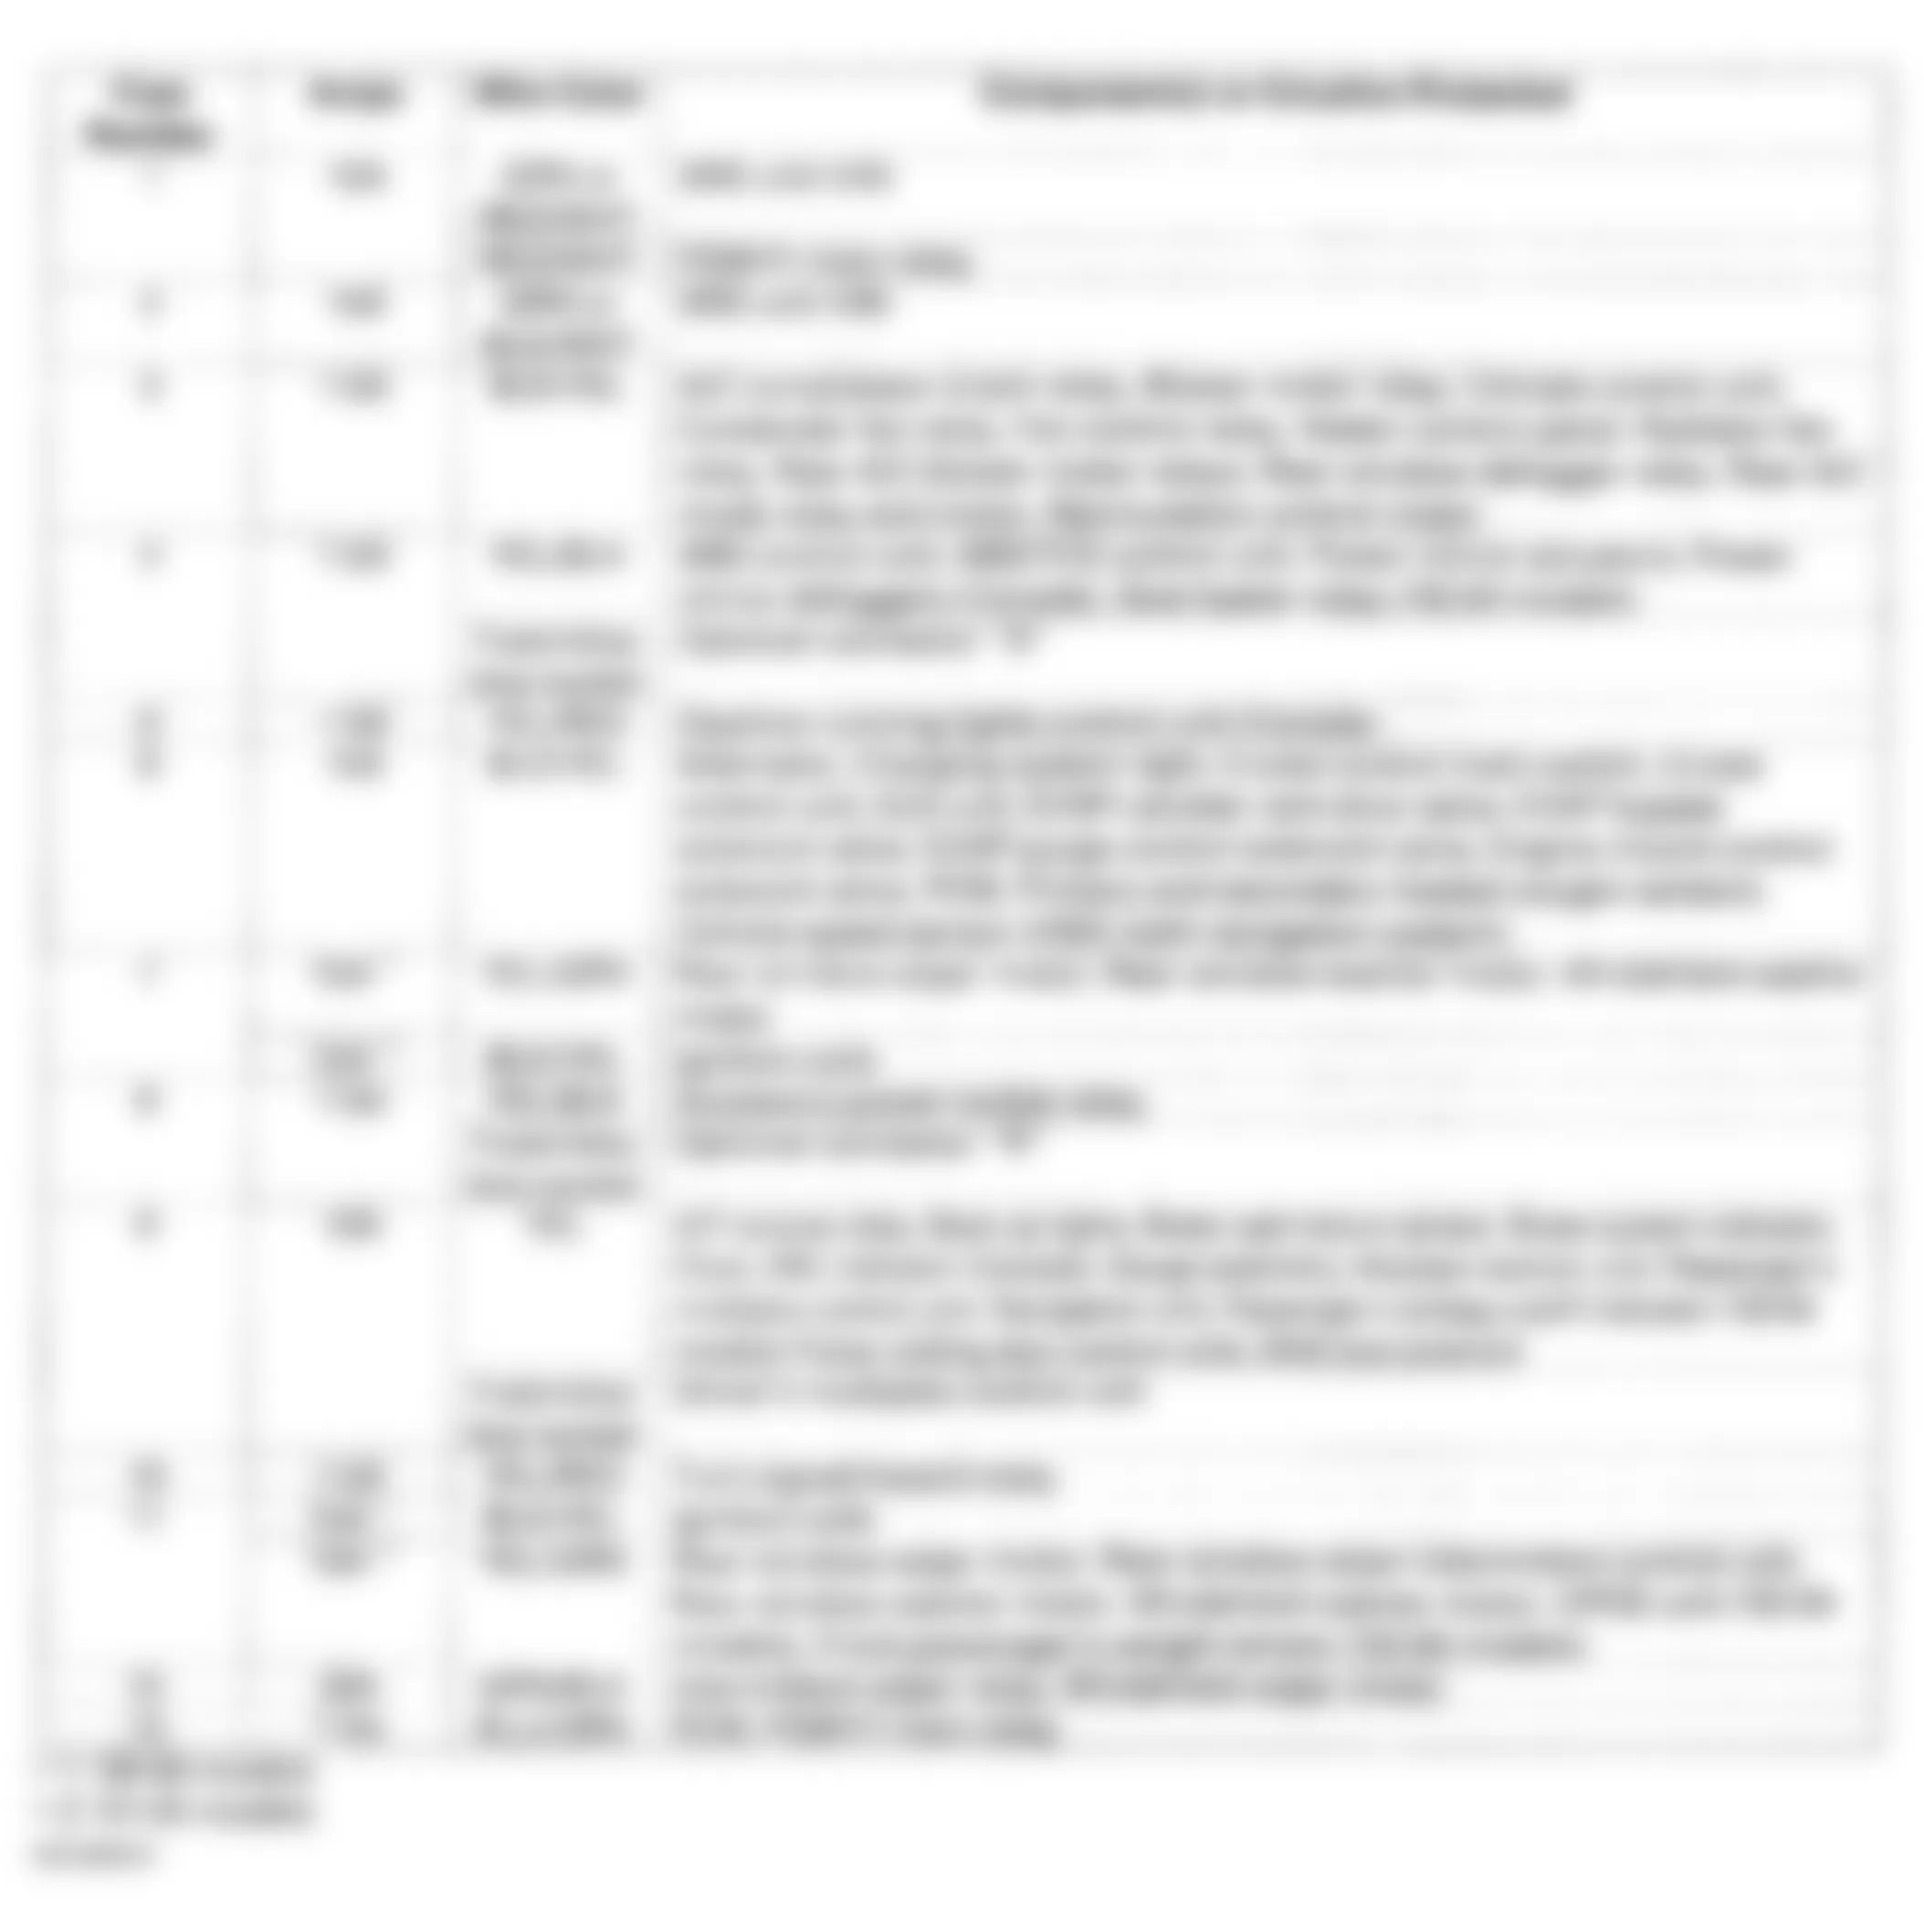 Honda Odyssey EX 2003 - Component Locations -  Drivers Under-Dash Fuse/Relay Box Identification Chart